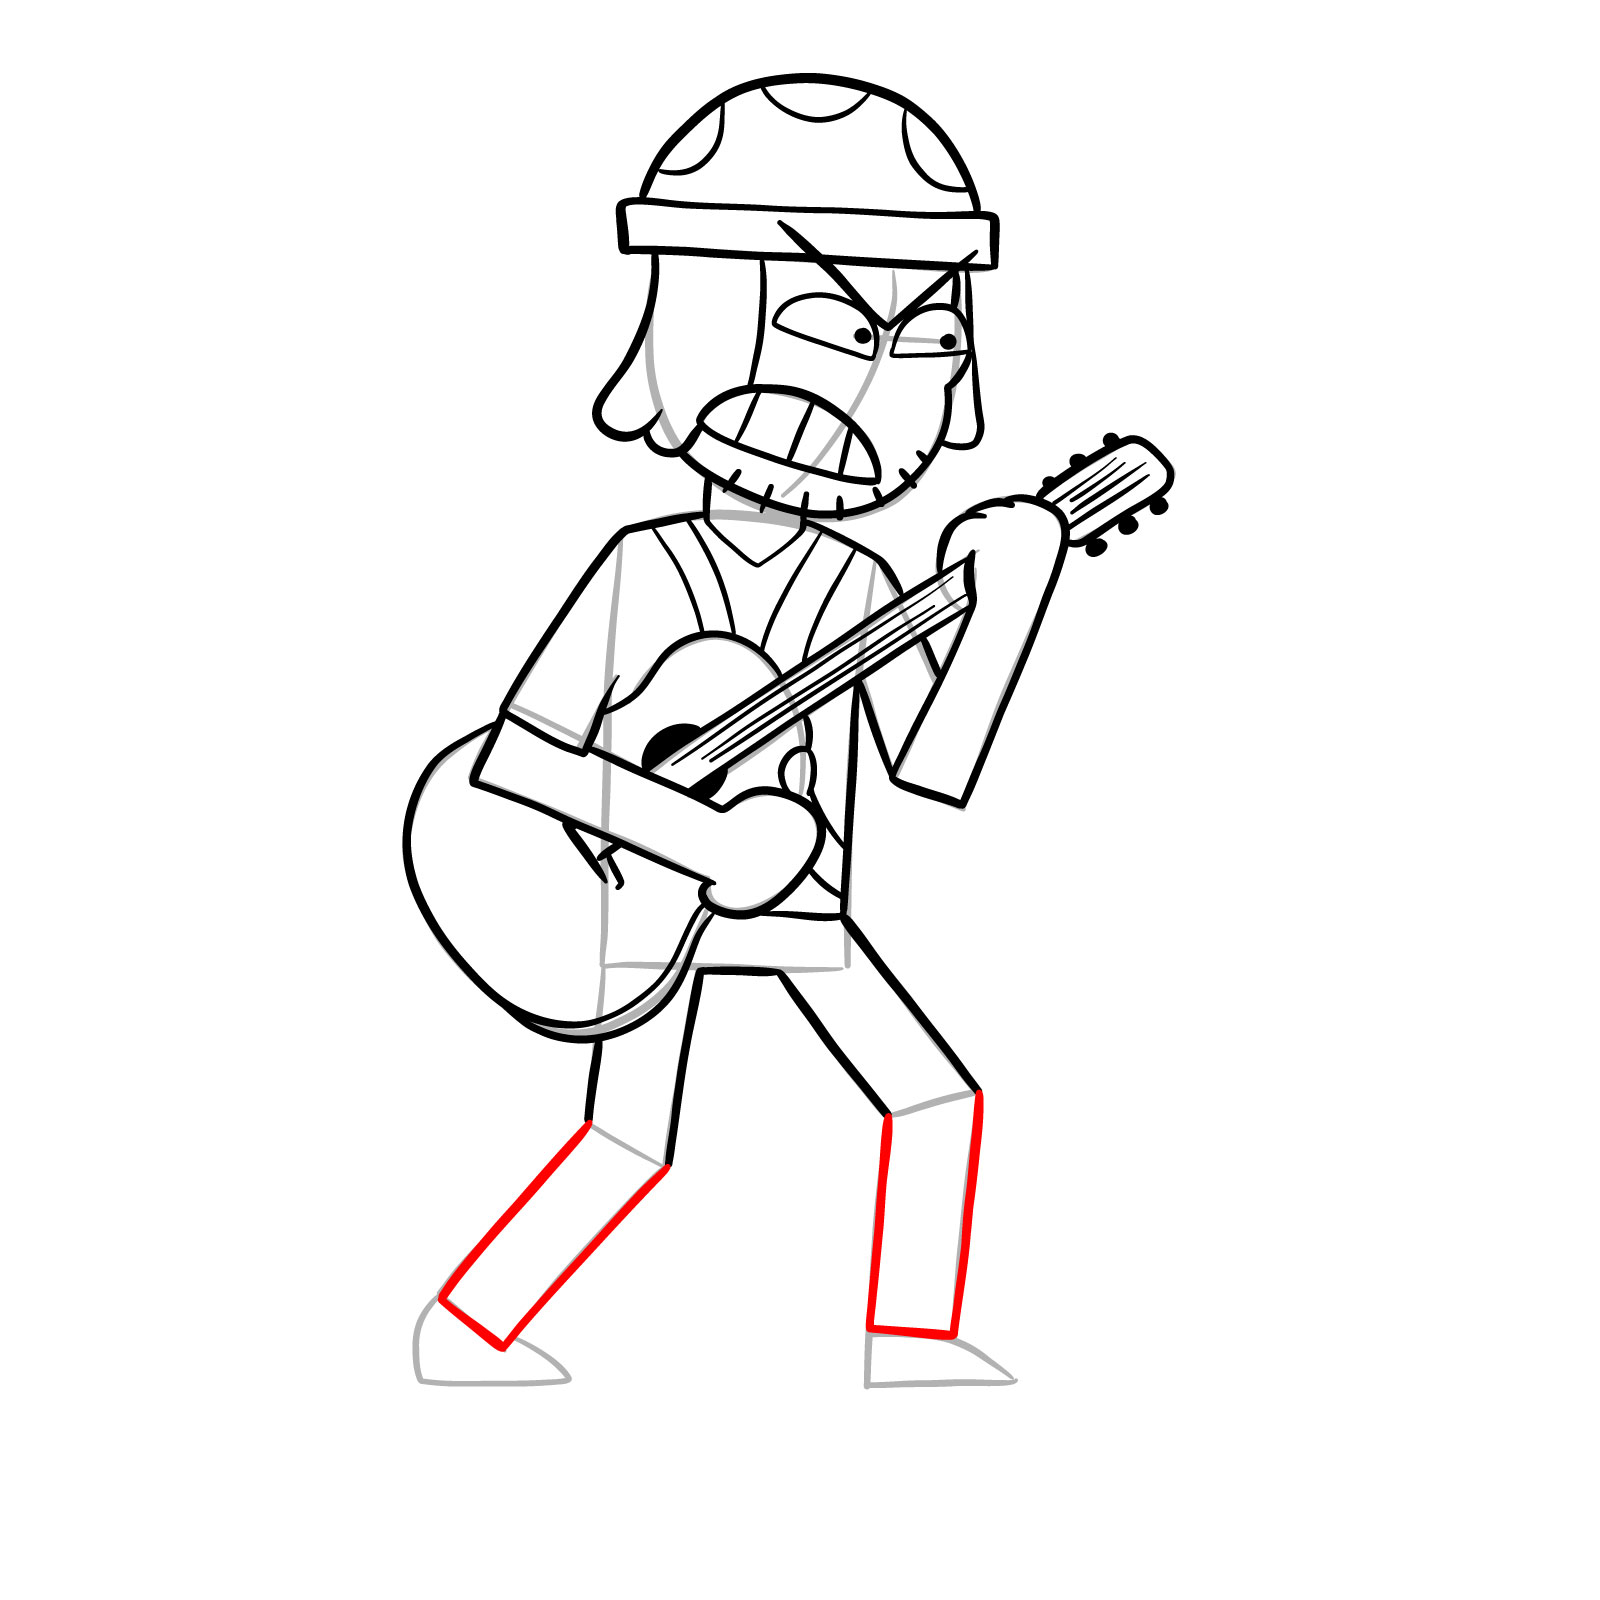 How to draw Suction Cup Man with a guitar - step 23